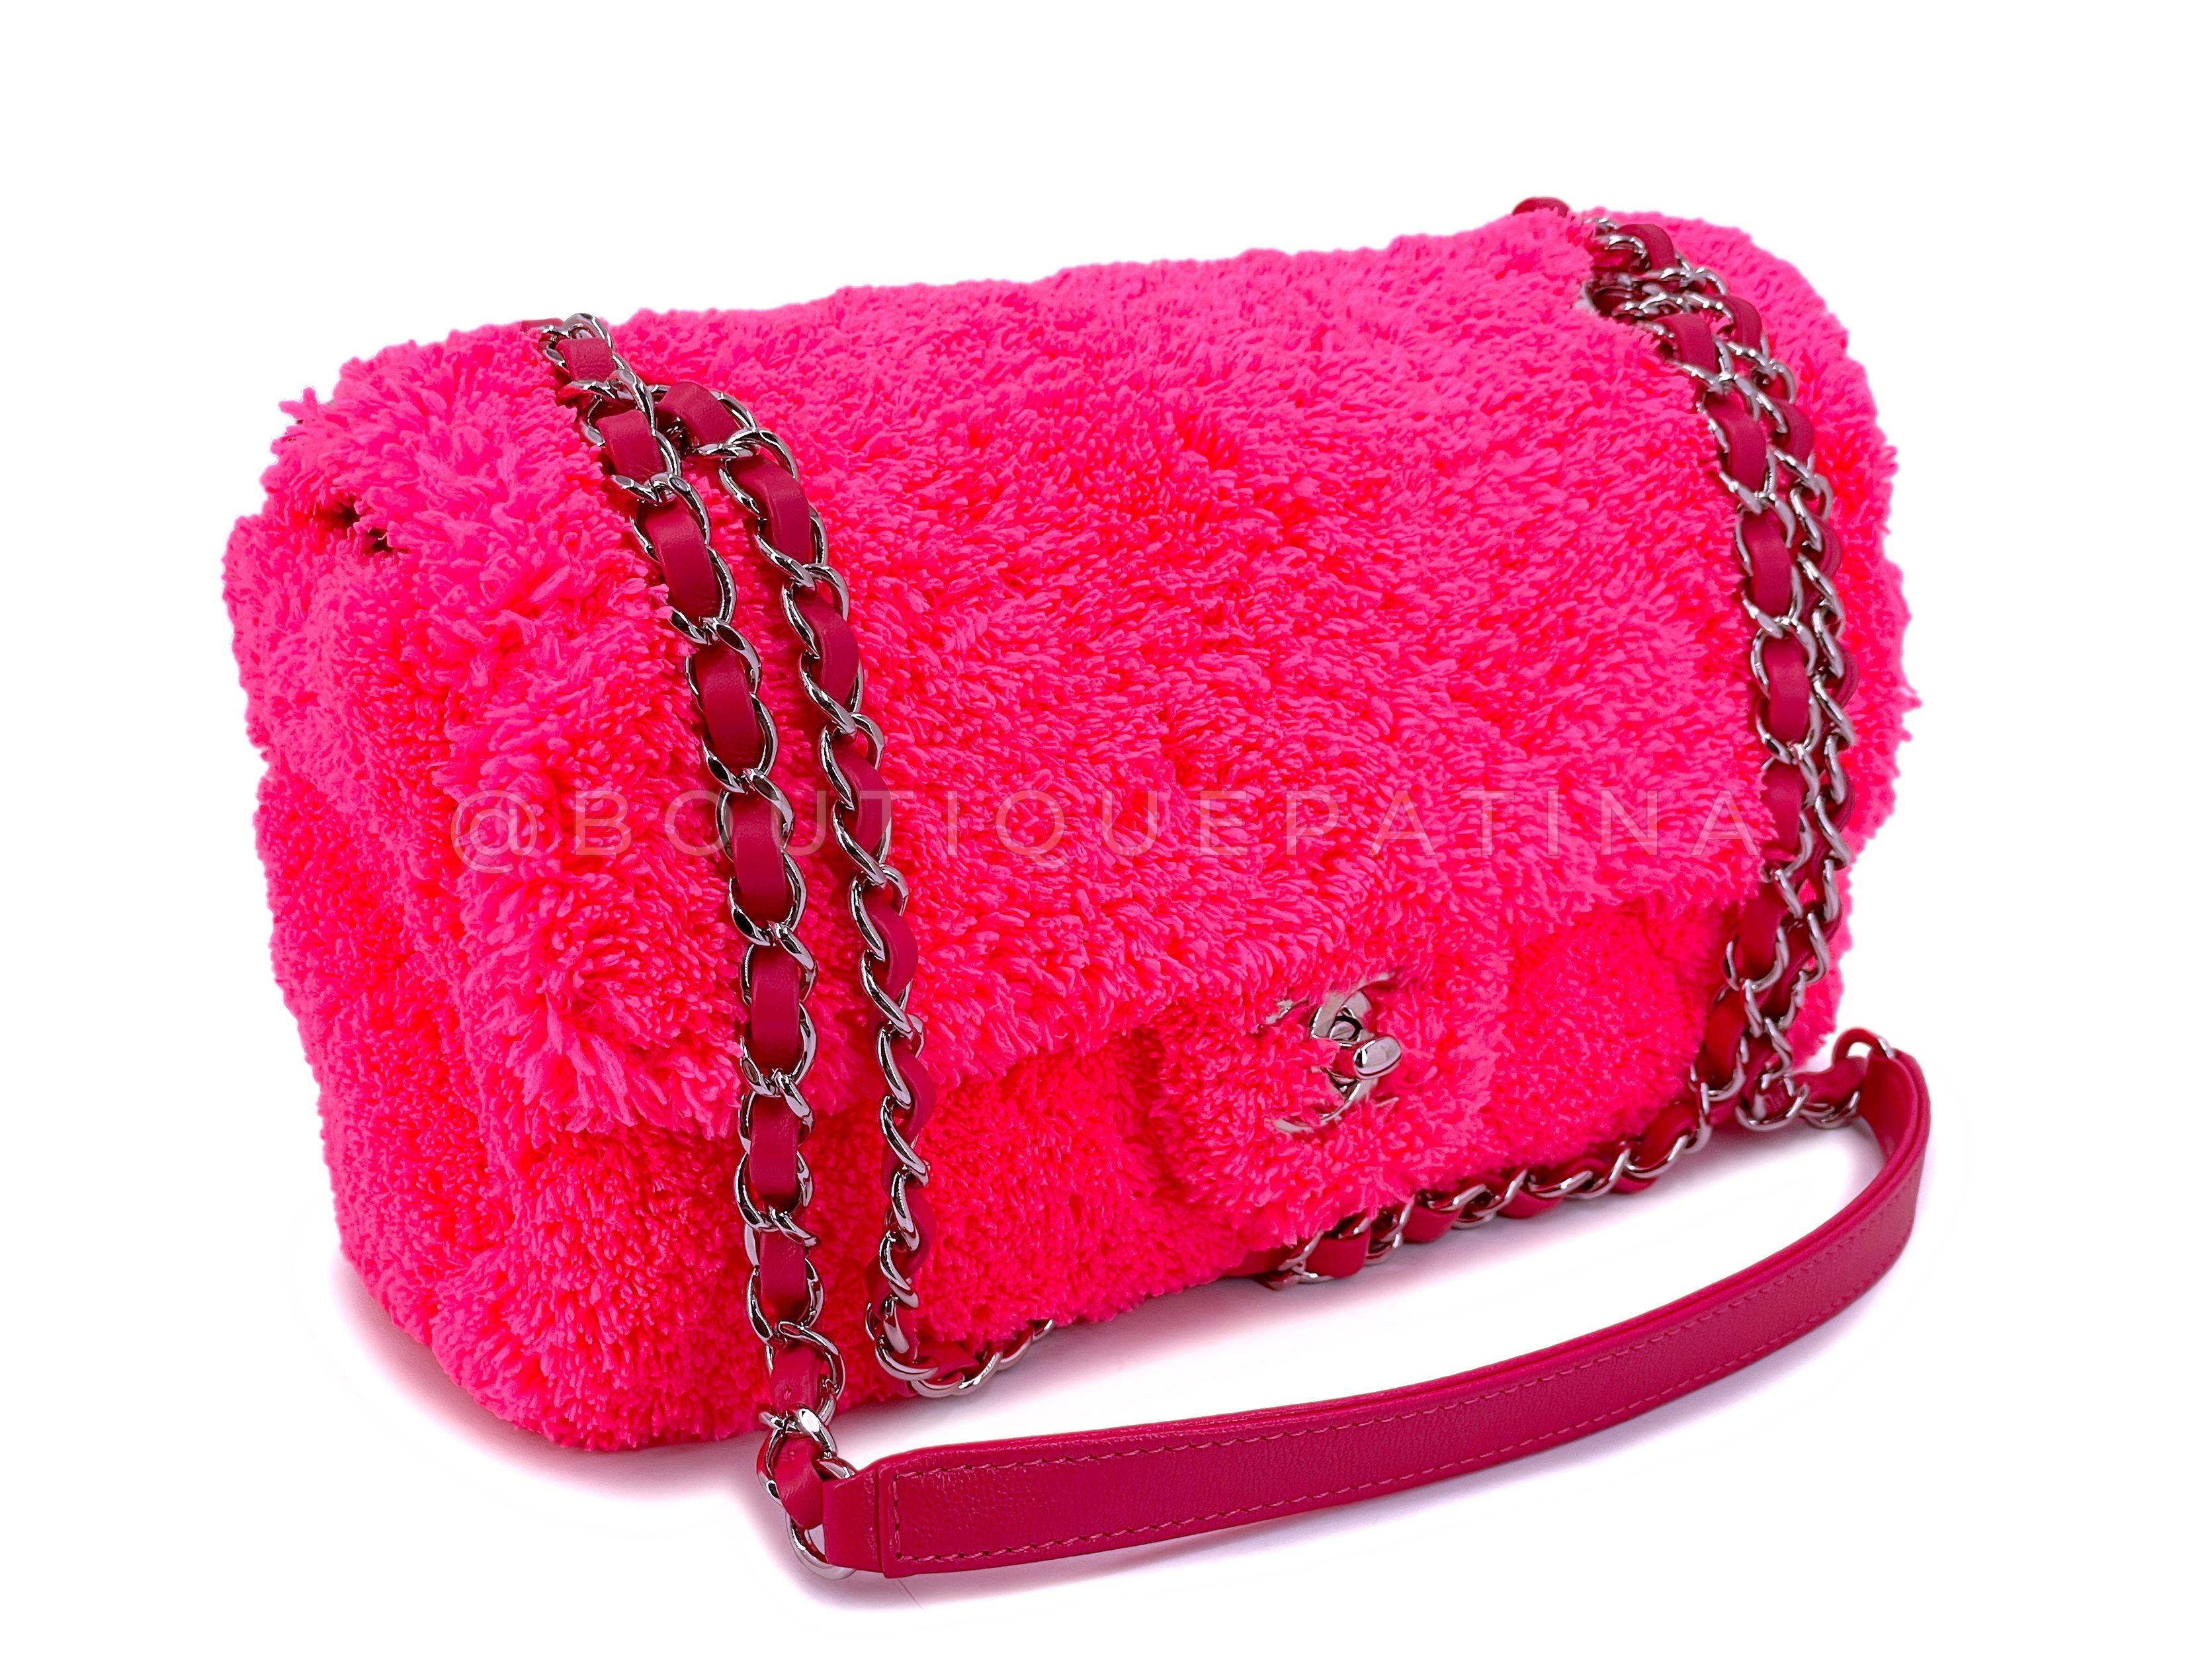 Store item: 67683
We love Chanel Neon Pink Terry Fur Flap Bag for its fun and whimsical style, cozy silhouette and ease of use. 

Comfort leather strap, shiny dark ruthenium hardware and a bold unique interior silk print lining. 

In neon pink terry